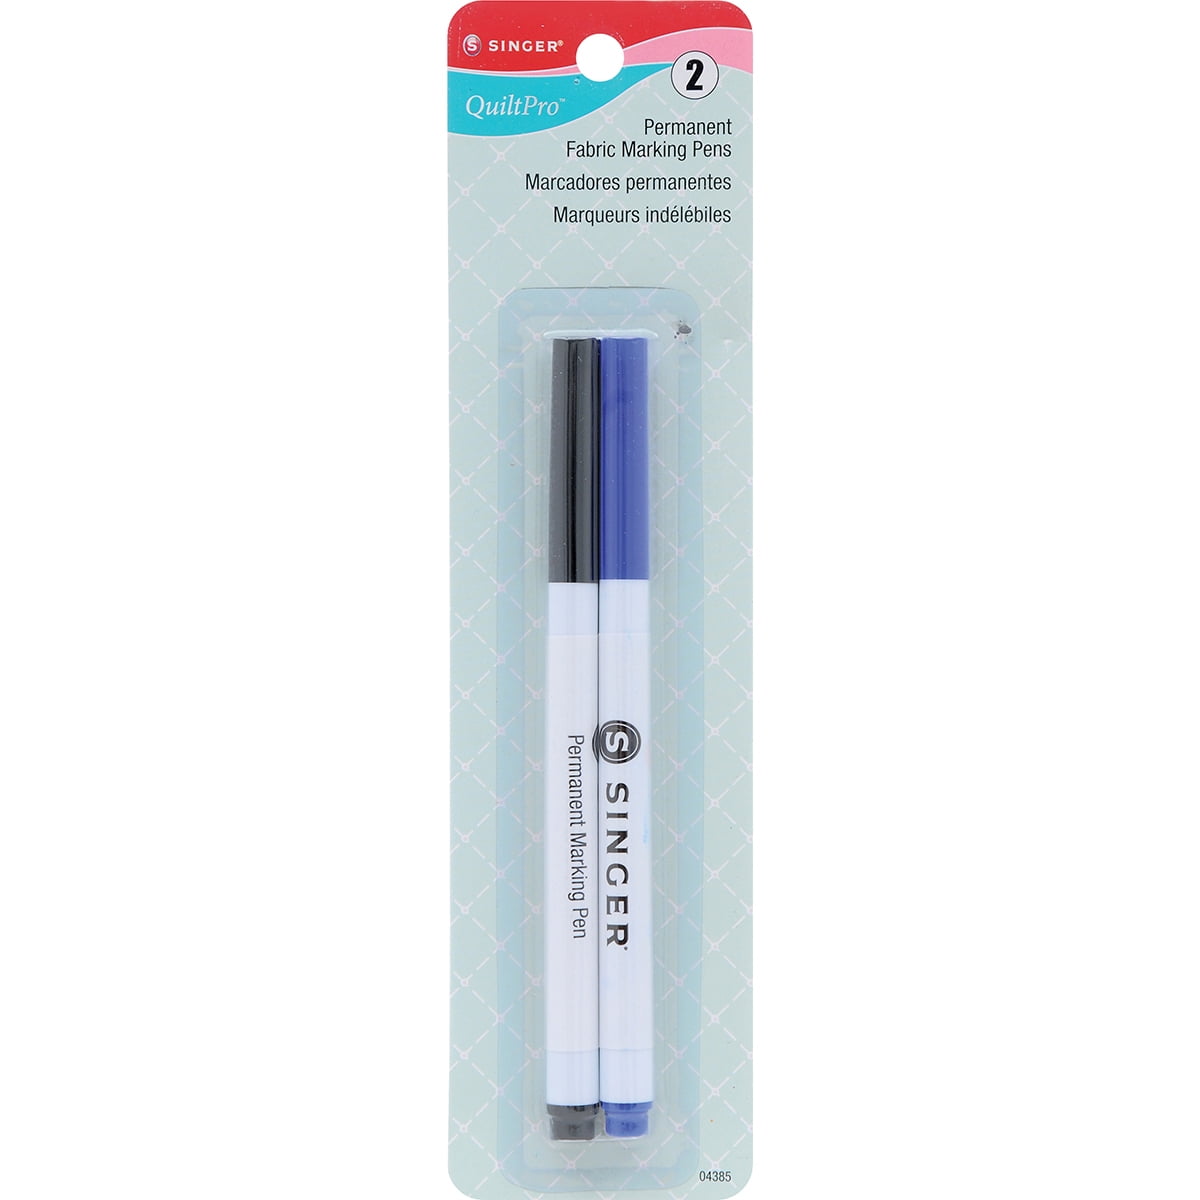 Dritz Dual Purpose Marking Pens, Mark-B-Gone & Disappearing Ink, 12 pc